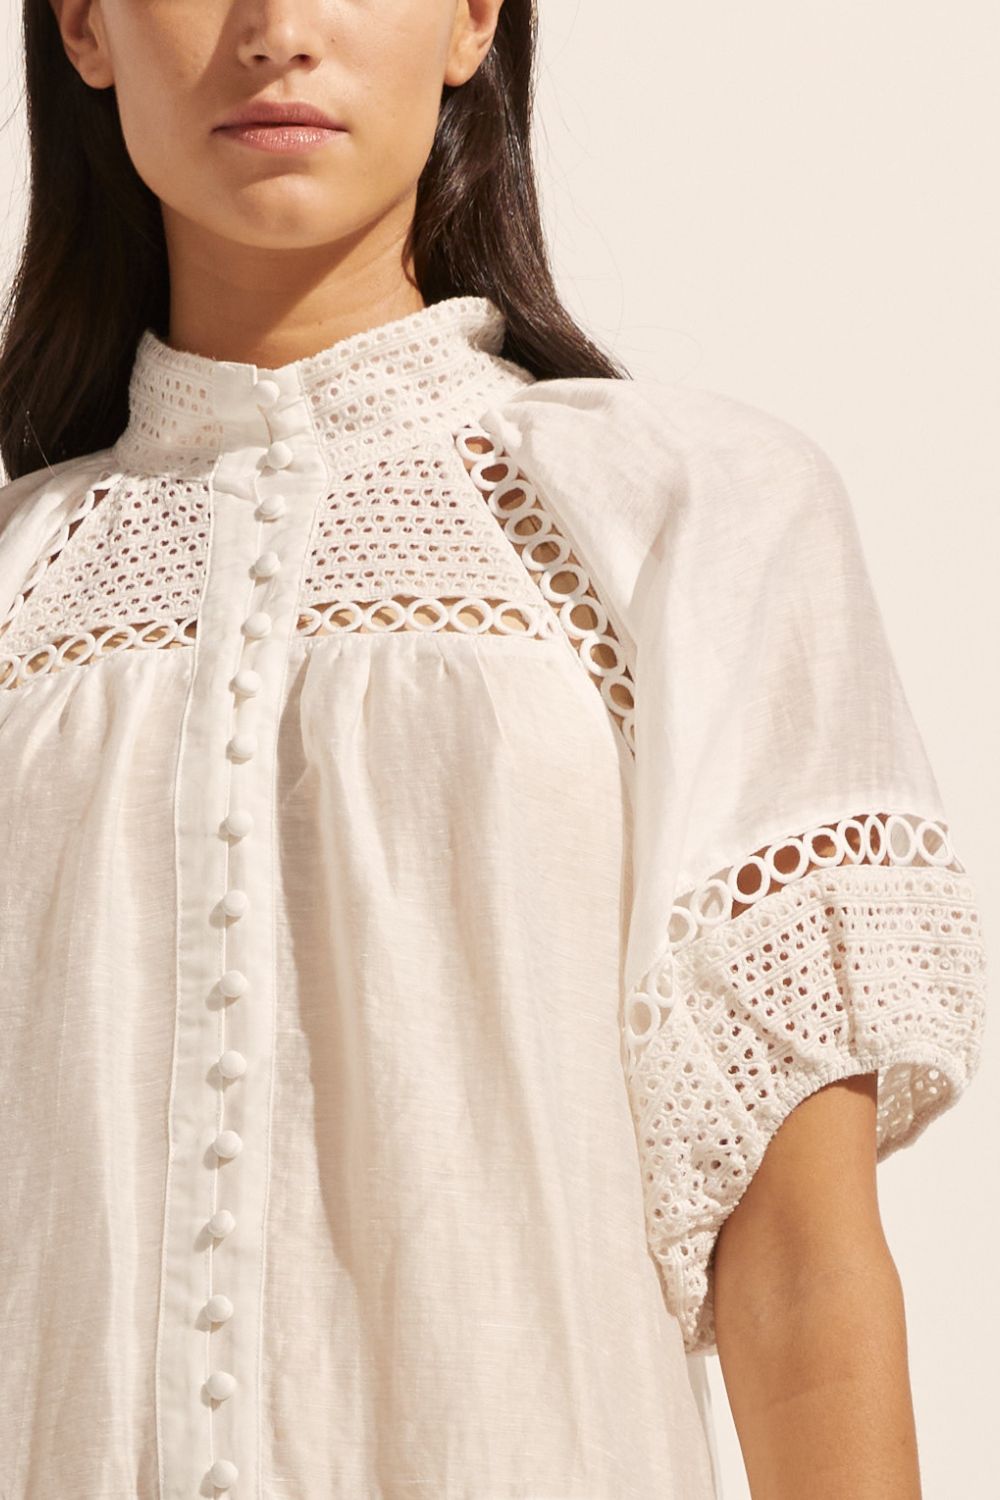 white, high neck, covered buttons, circular lace detailing, drop waist, mid-length sleeve, mini dress, close up image